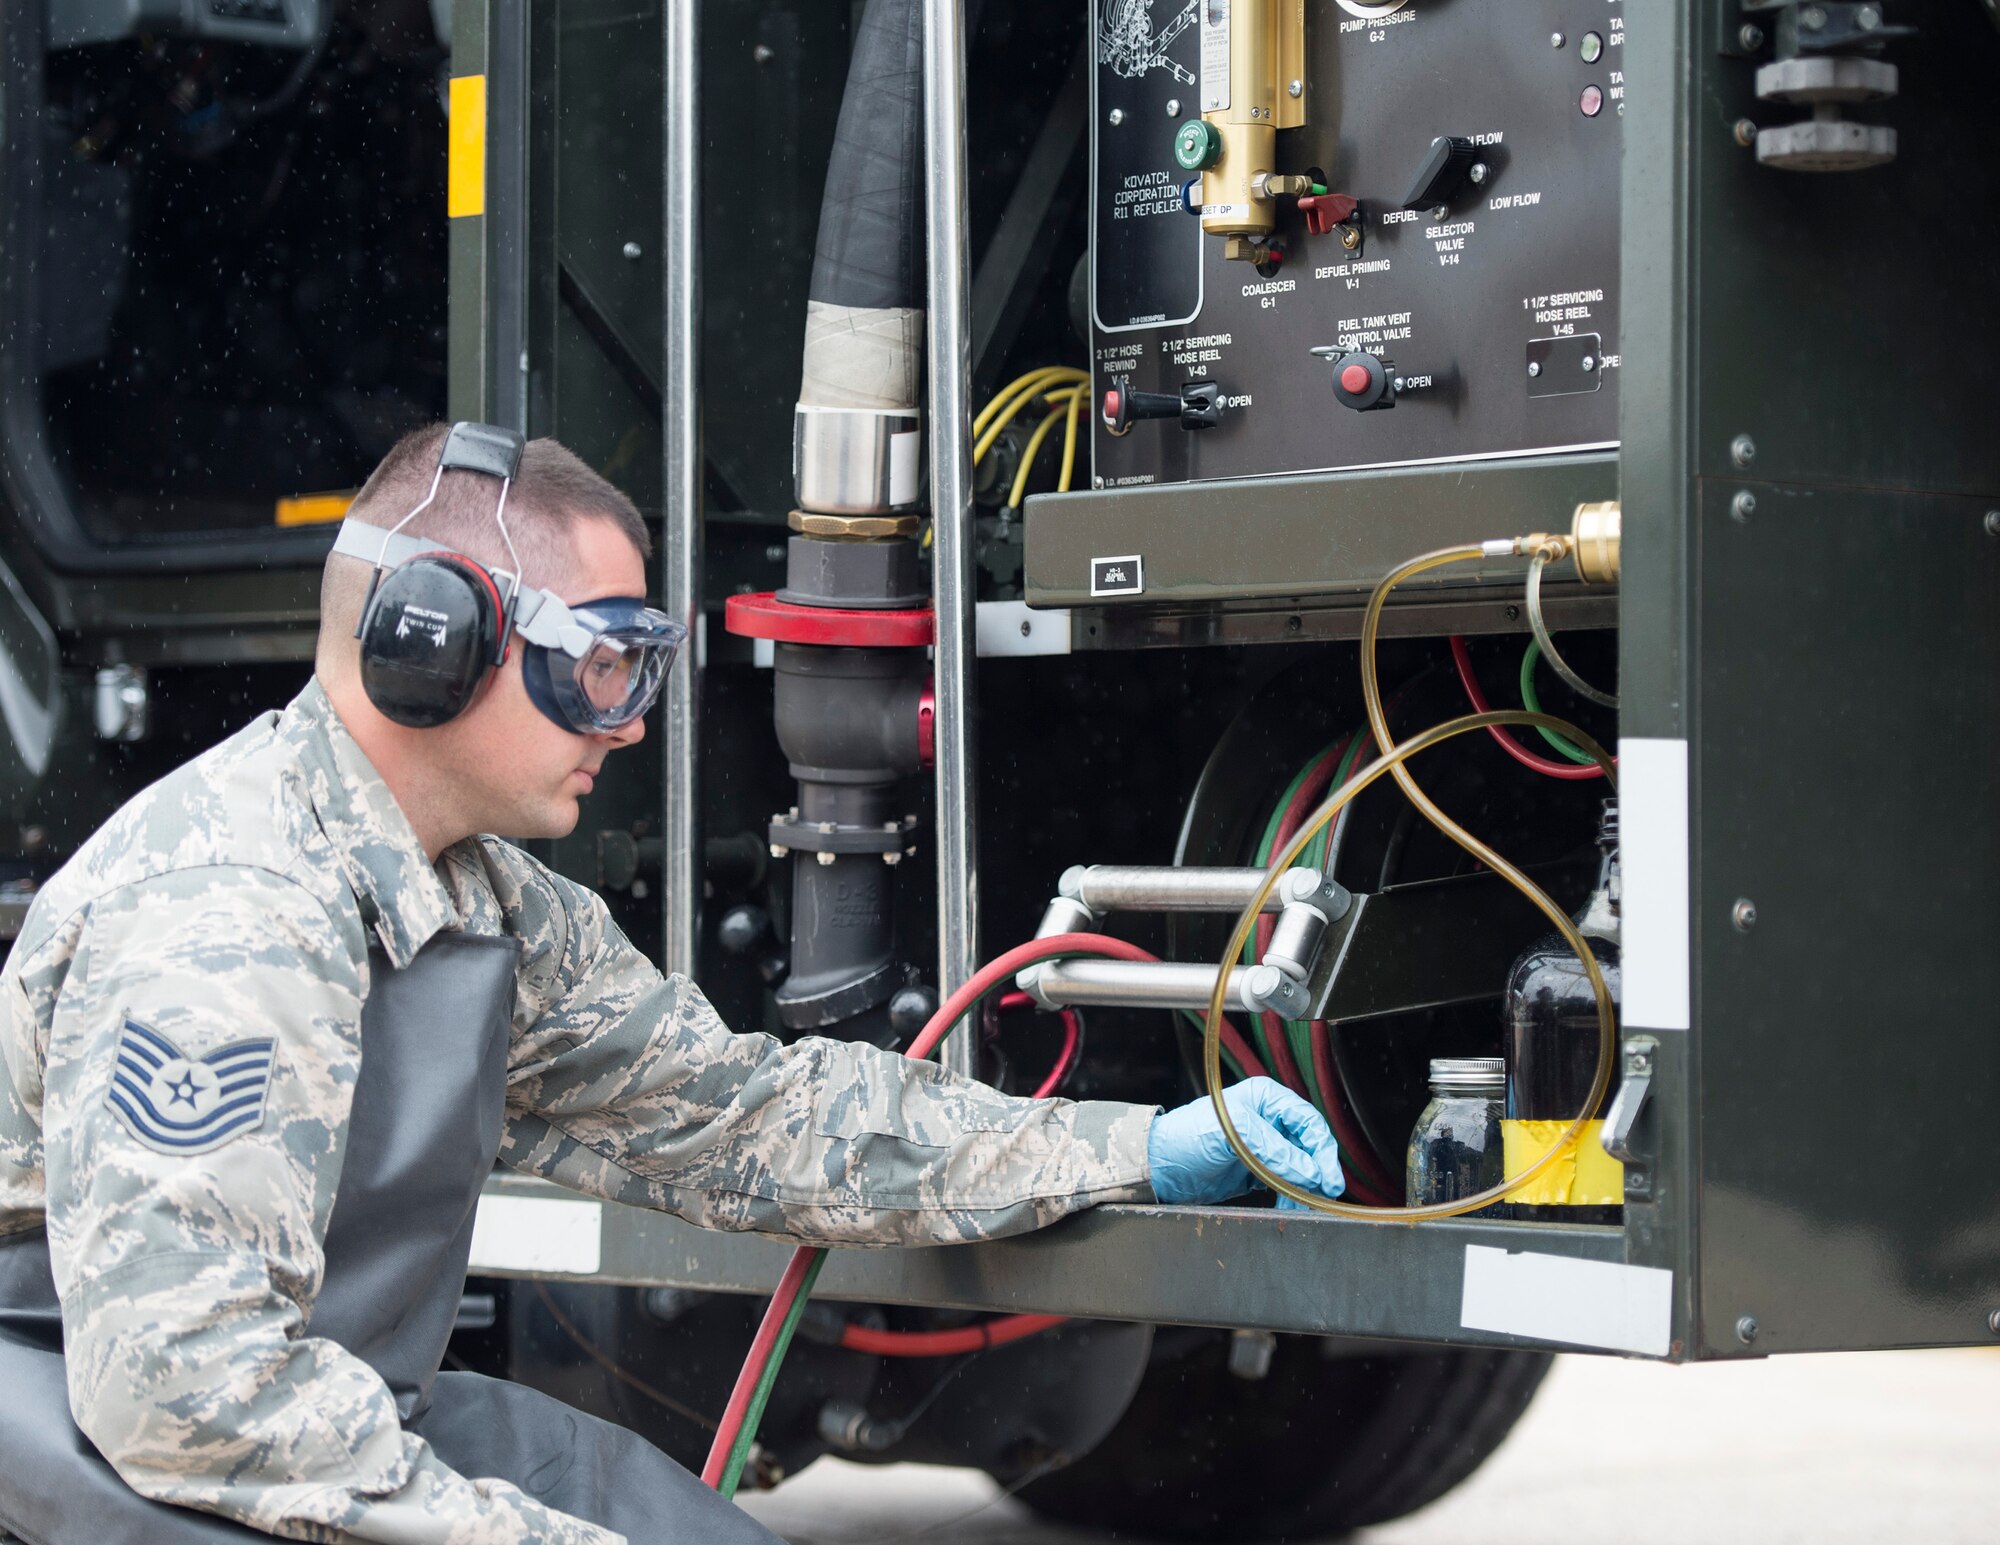 U.S. Air Force Tech. Sgt. Dustin Legatt, a fuels specialist with the 133rd Petroleum, Oil and Lubricants Flight, monitors the quality control of the in-line sampler in St. Paul, Minn., July 10, 2019.